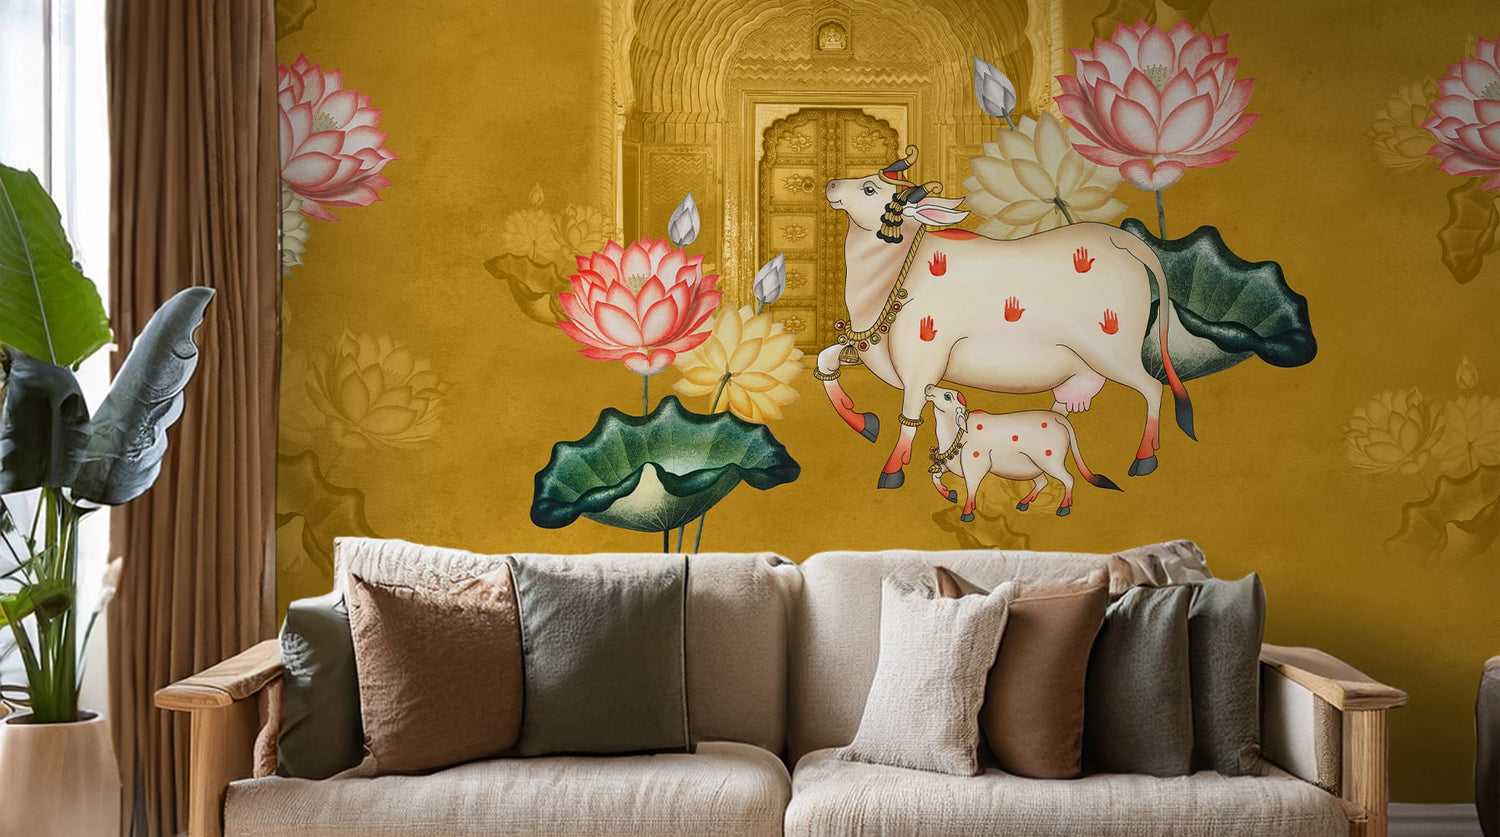 Pichwai Inspired Cow and Lotus Mural Wallpaper 